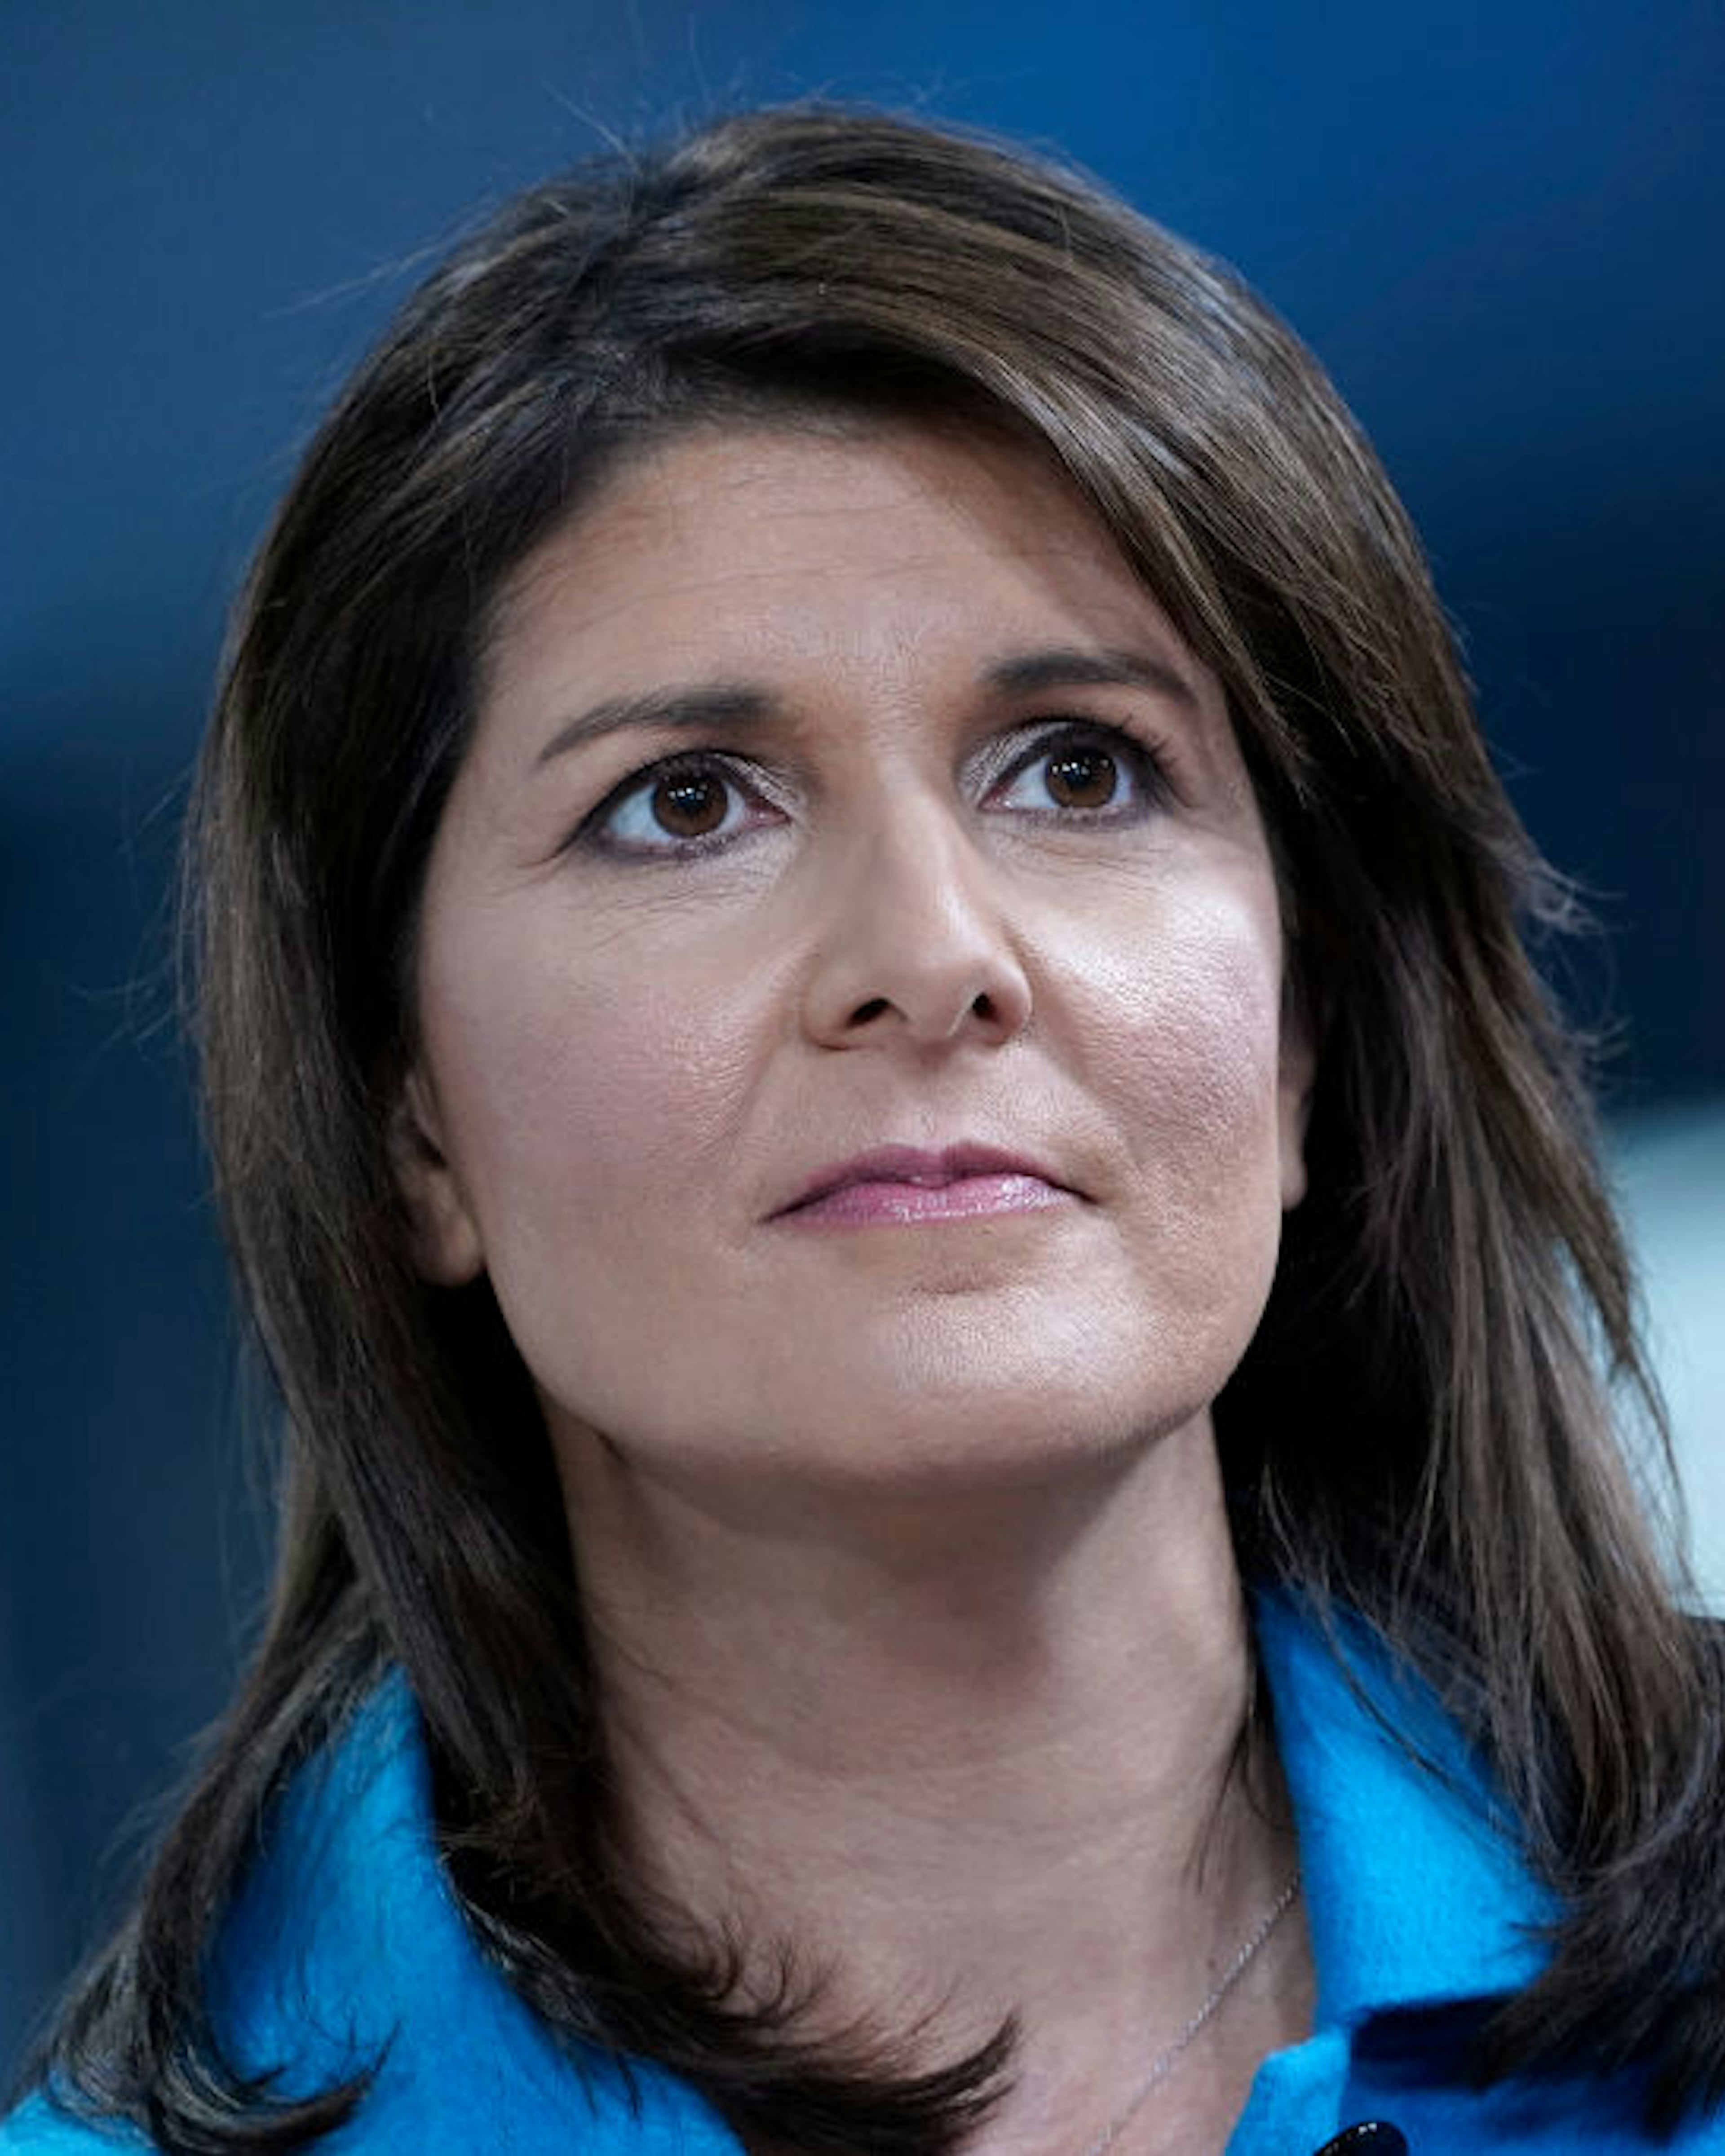 NEW YORK, NEW YORK - NOVEMBER 12: (EXCLUSIVE COVERAGE) Former UN Ambassador Nikki Haley visits "Fox &amp; Friends" at Fox News Channel Studios on November 12, 2019 in New York City. (Photo by John Lamparski/Getty Images)